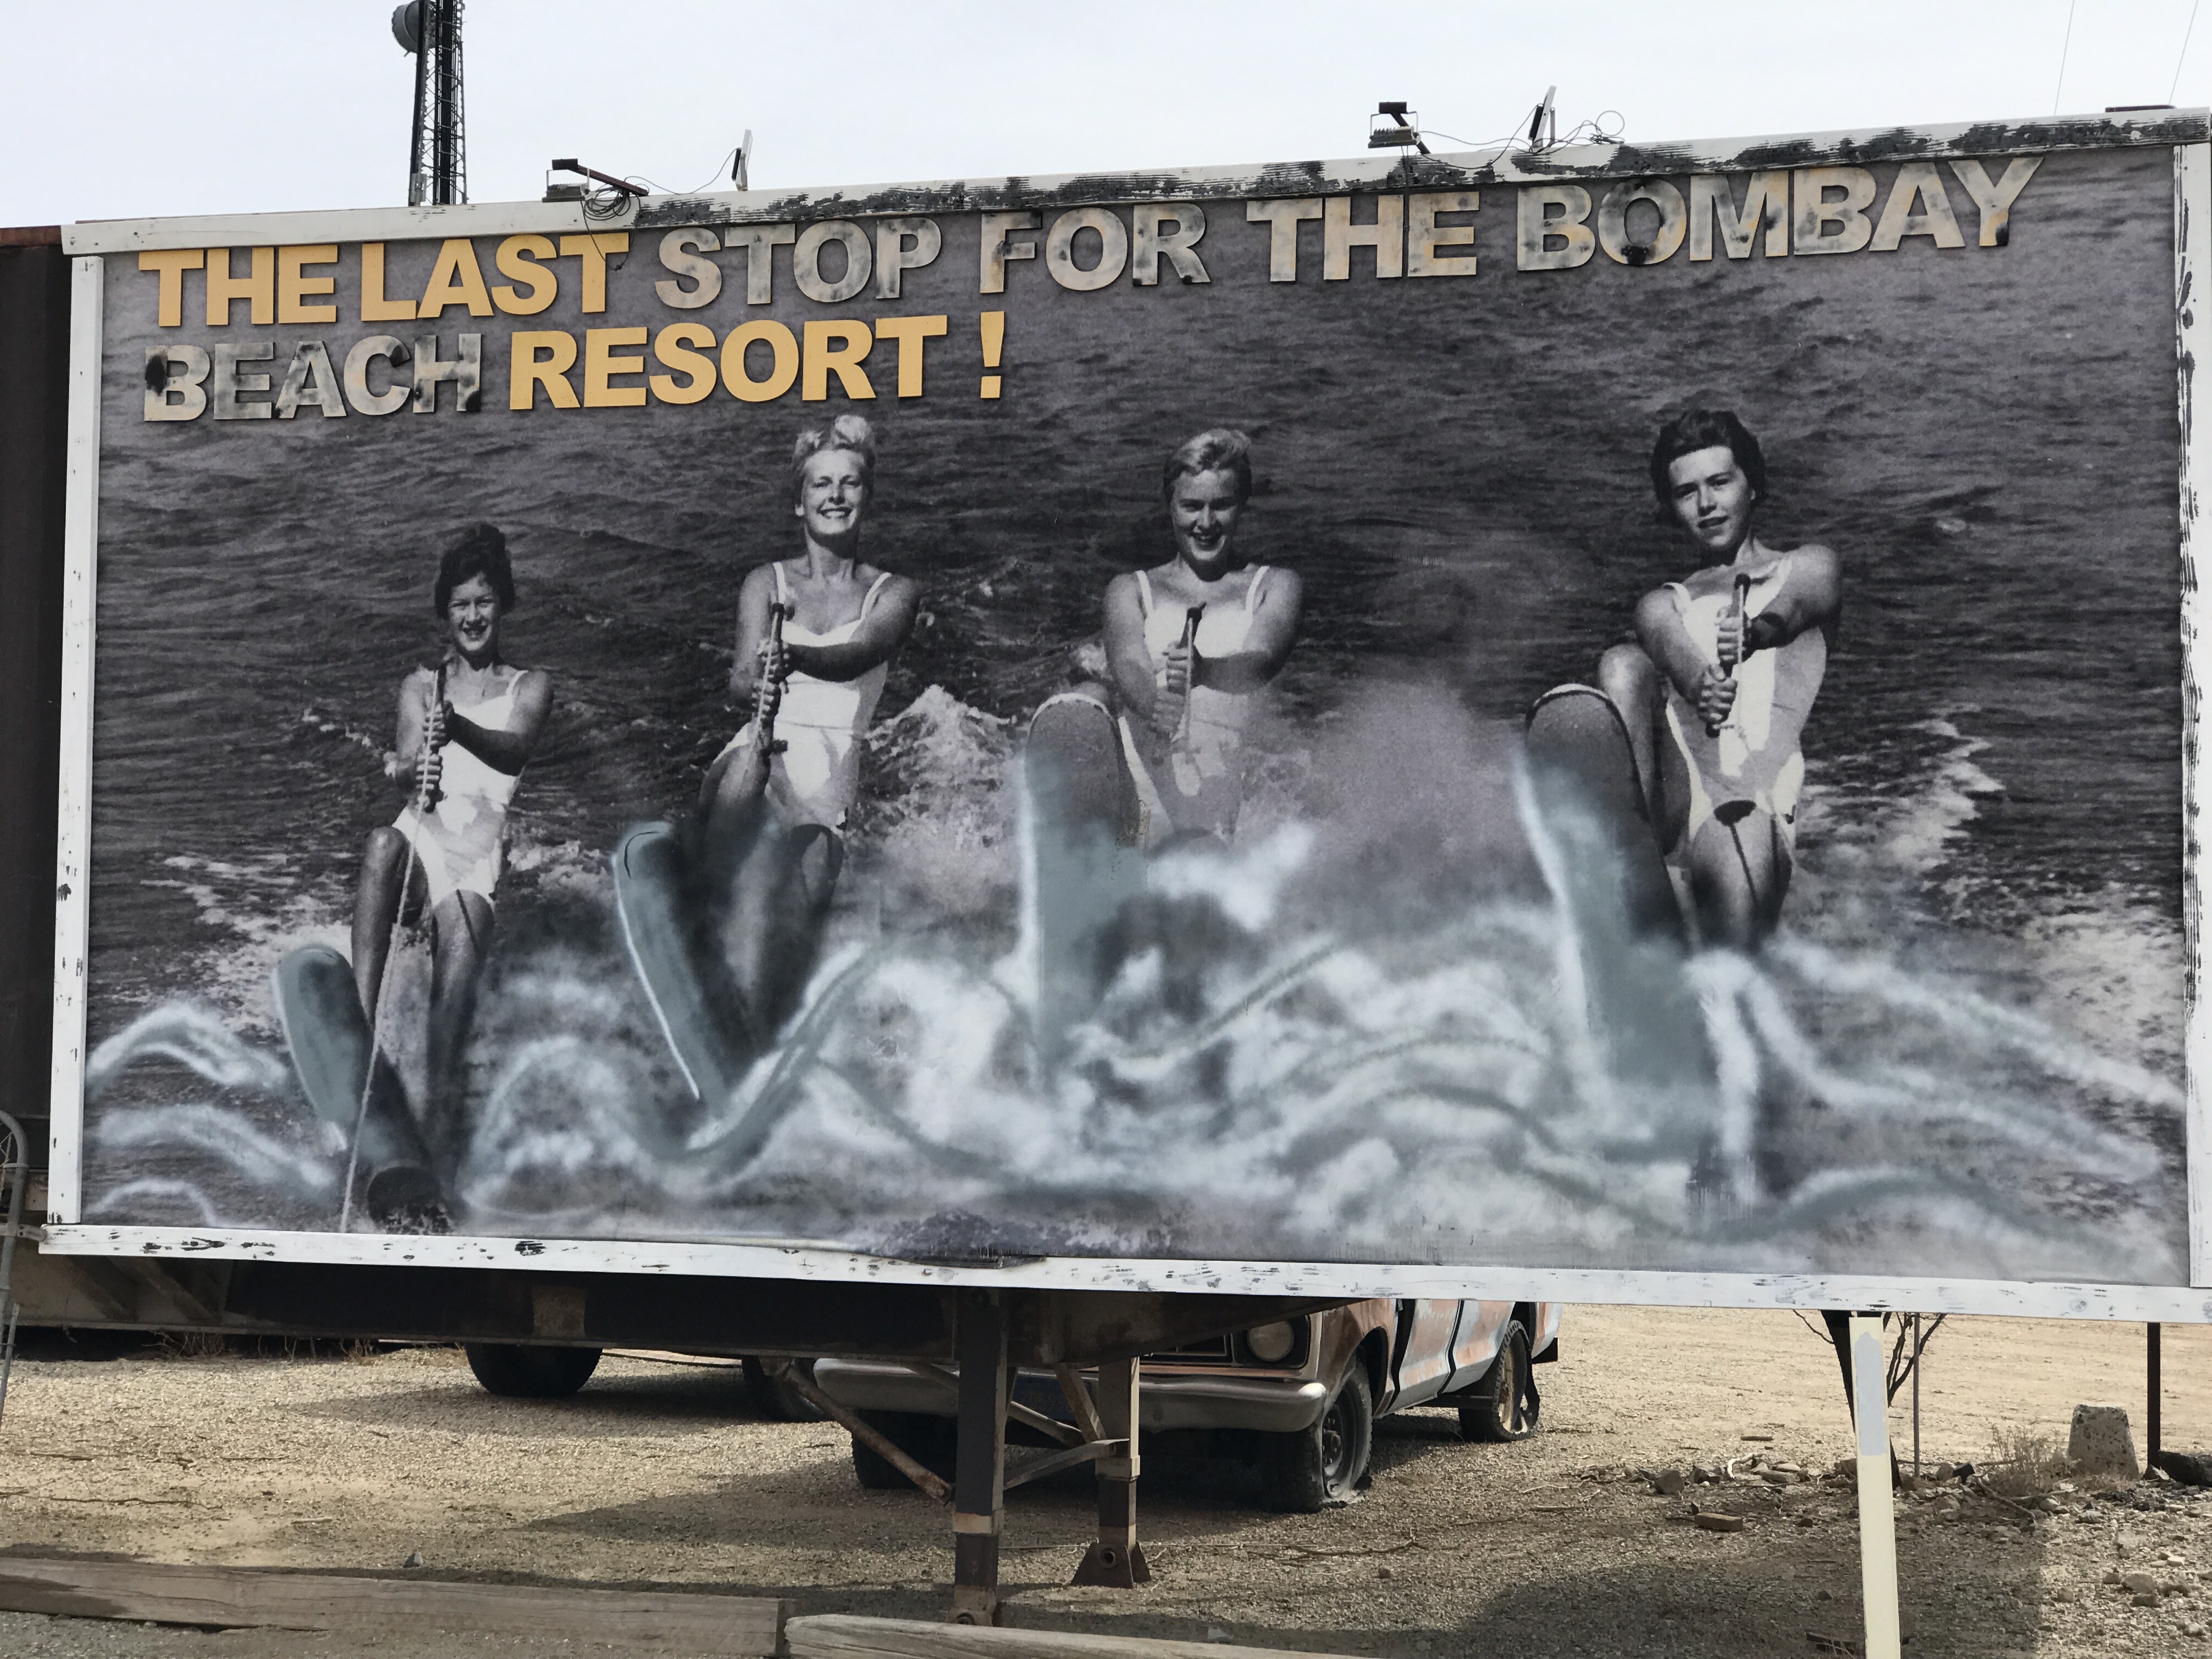 A nostalgic poster showing four waterskiers showing signs of aging.